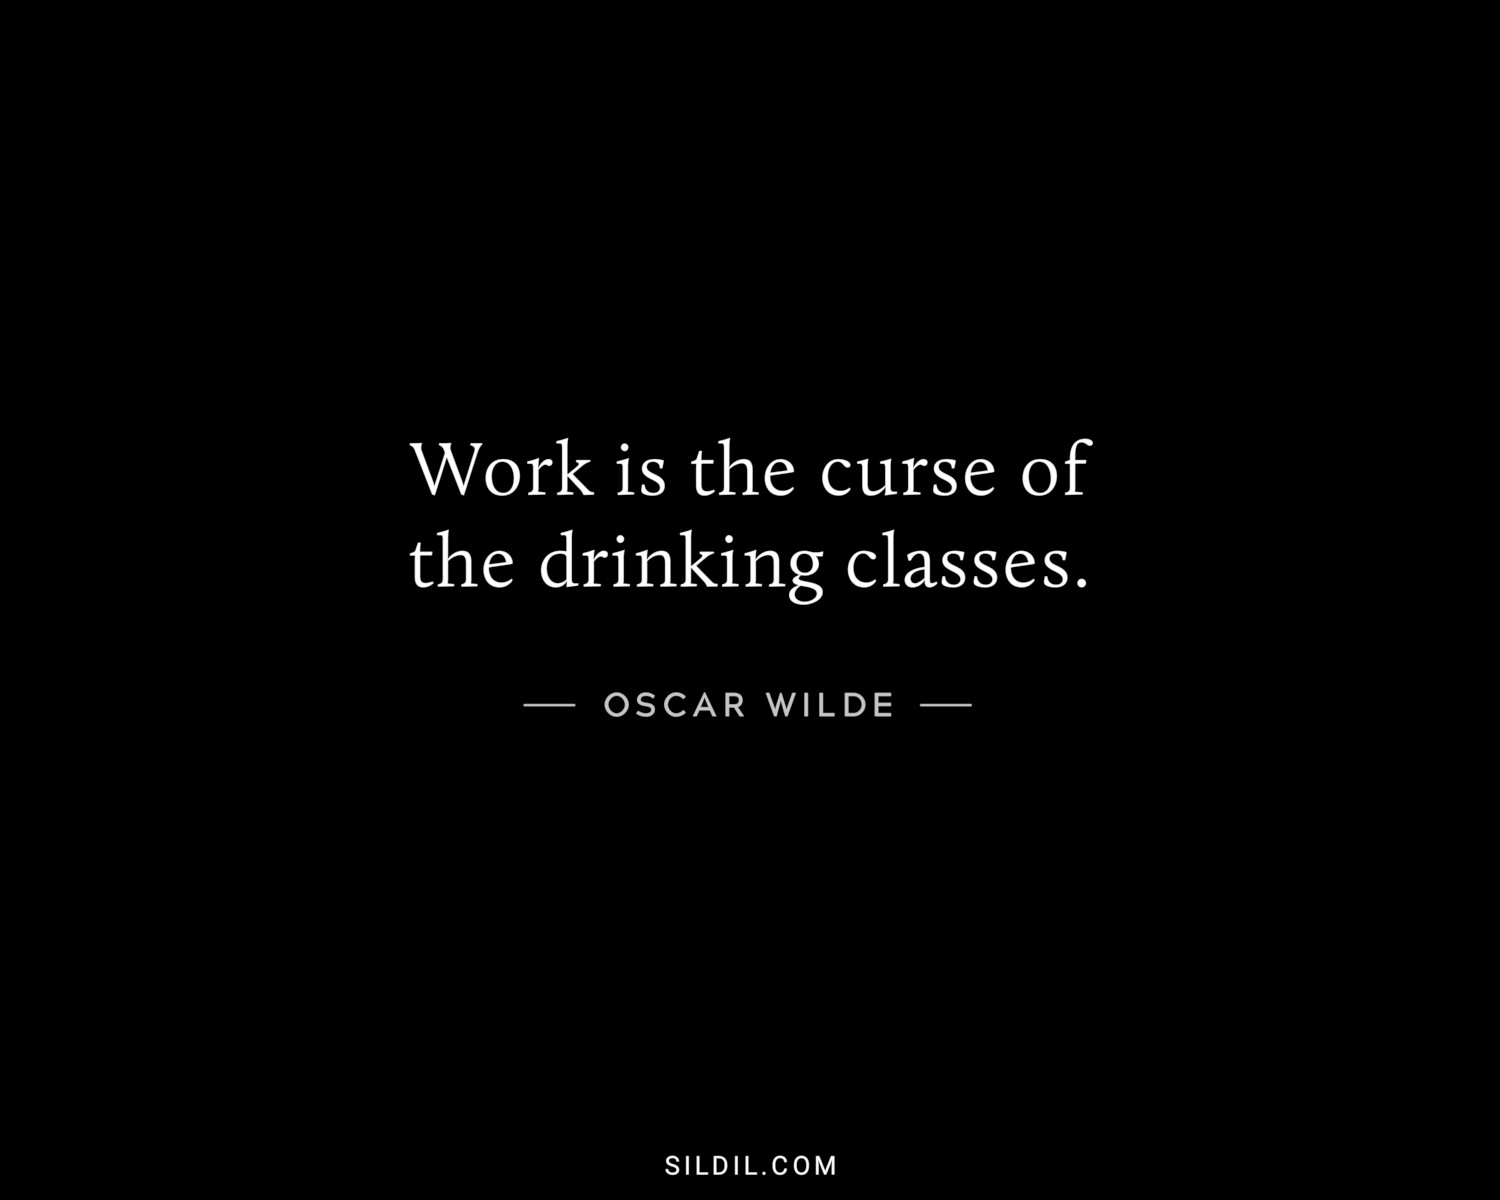 Work is the curse of the drinking classes.